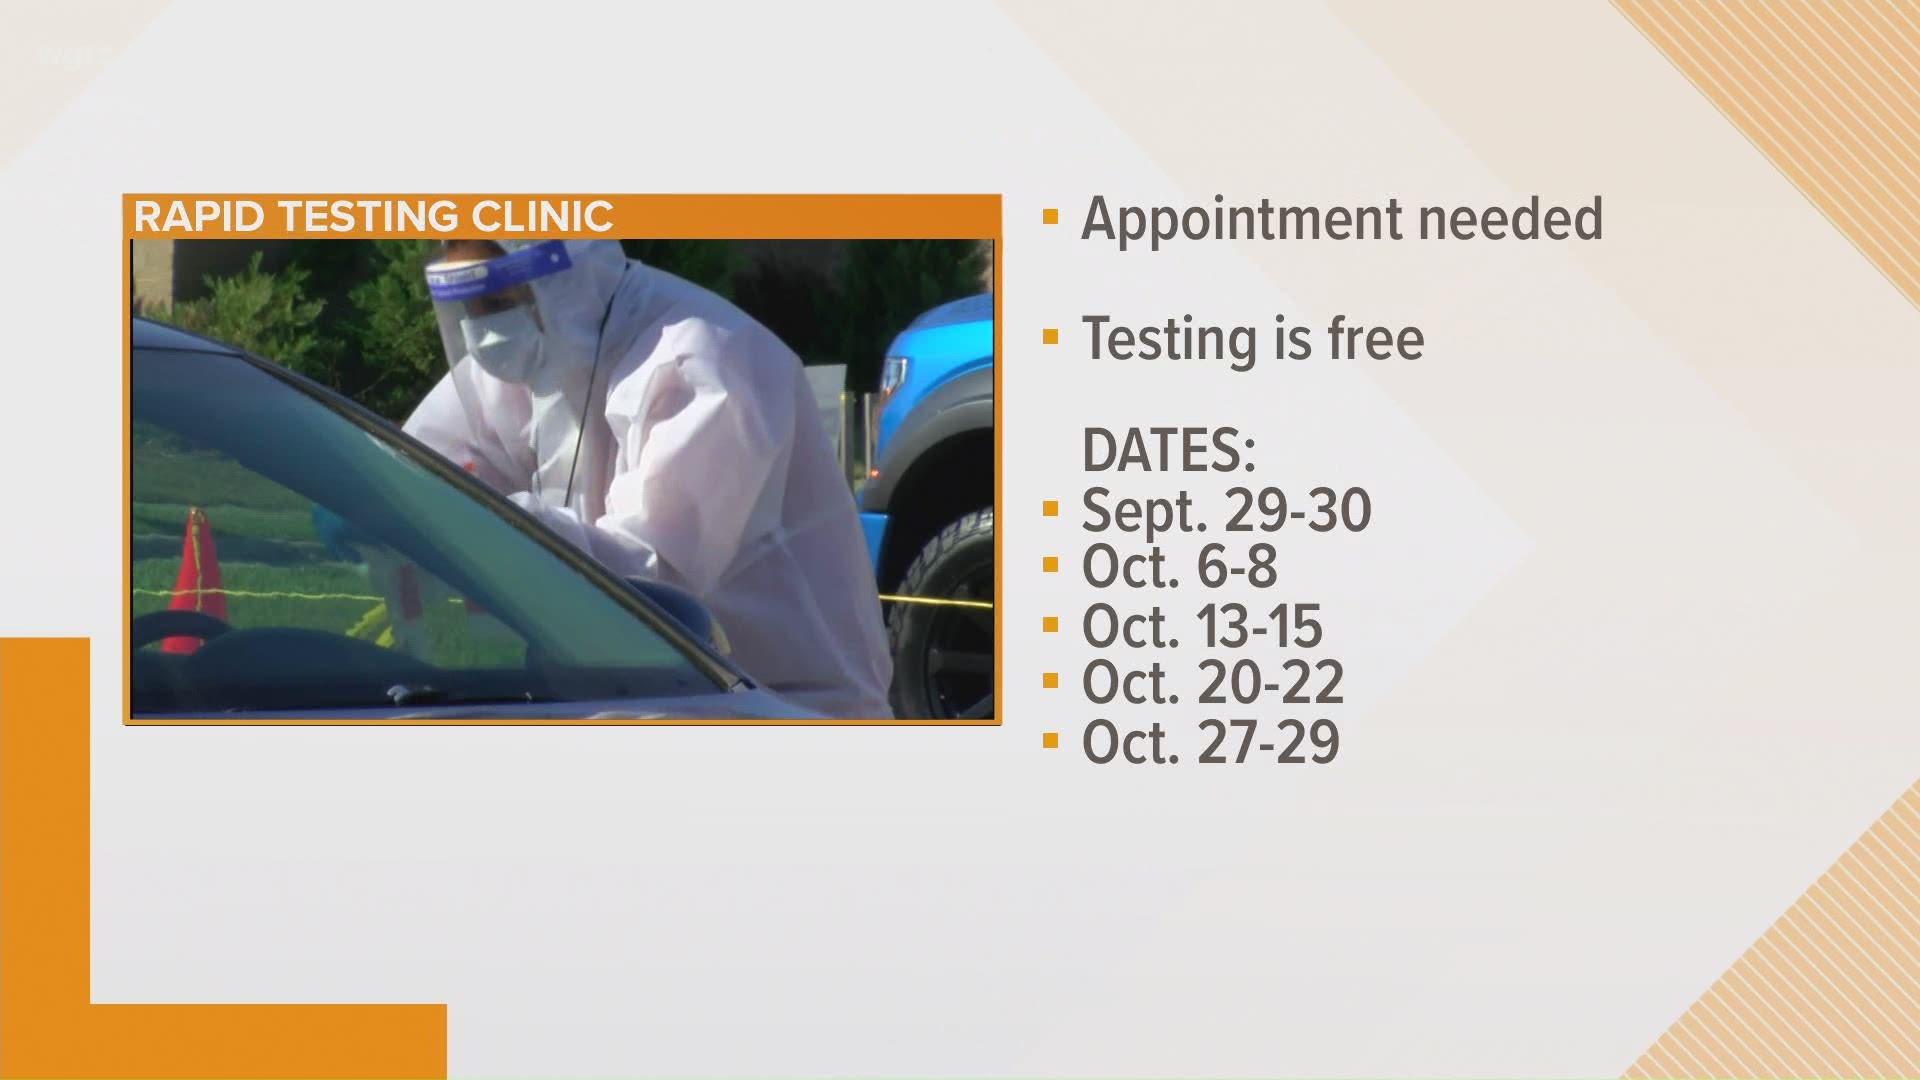 Appointments are required to get tested, but the results will be provided within two hours.